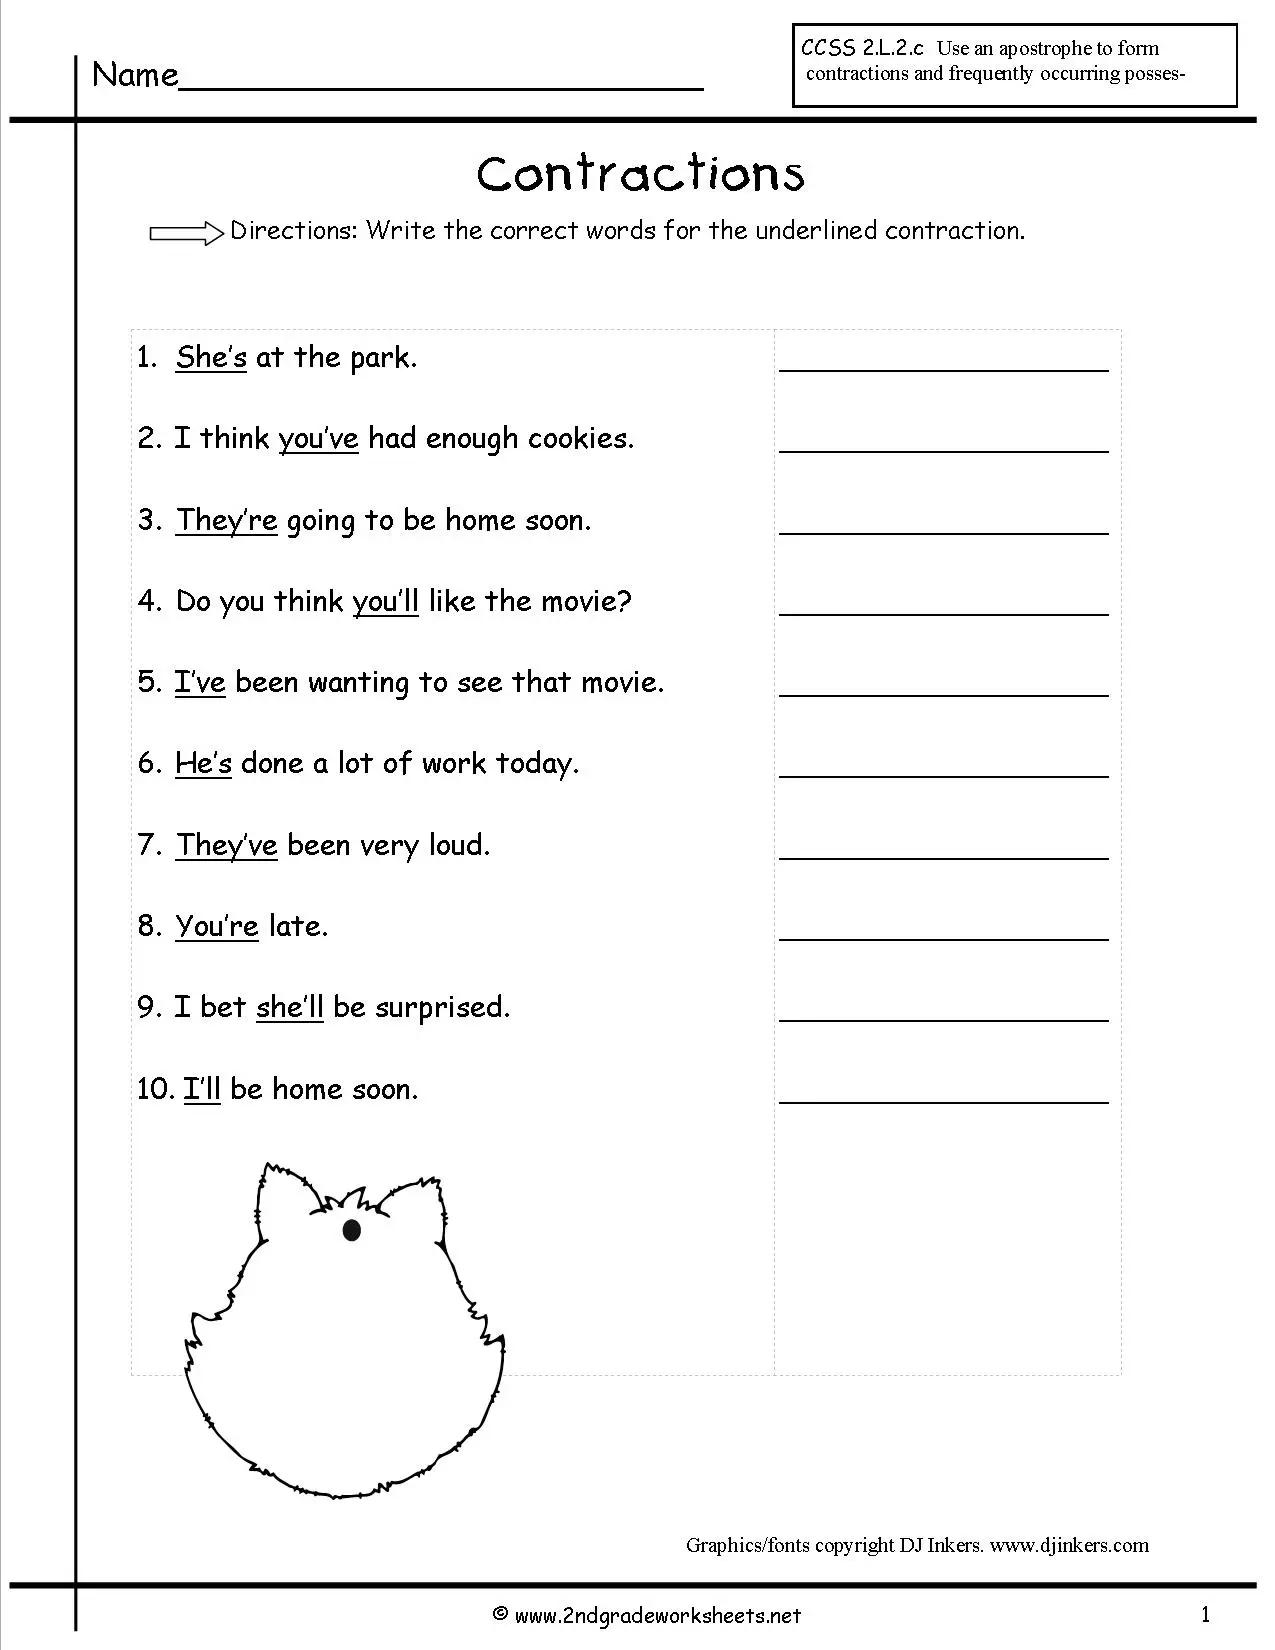 20 Contractions Worksheets for Improving Your Grammar - Kitty Baby Within Contractions Worksheet 3rd Grade